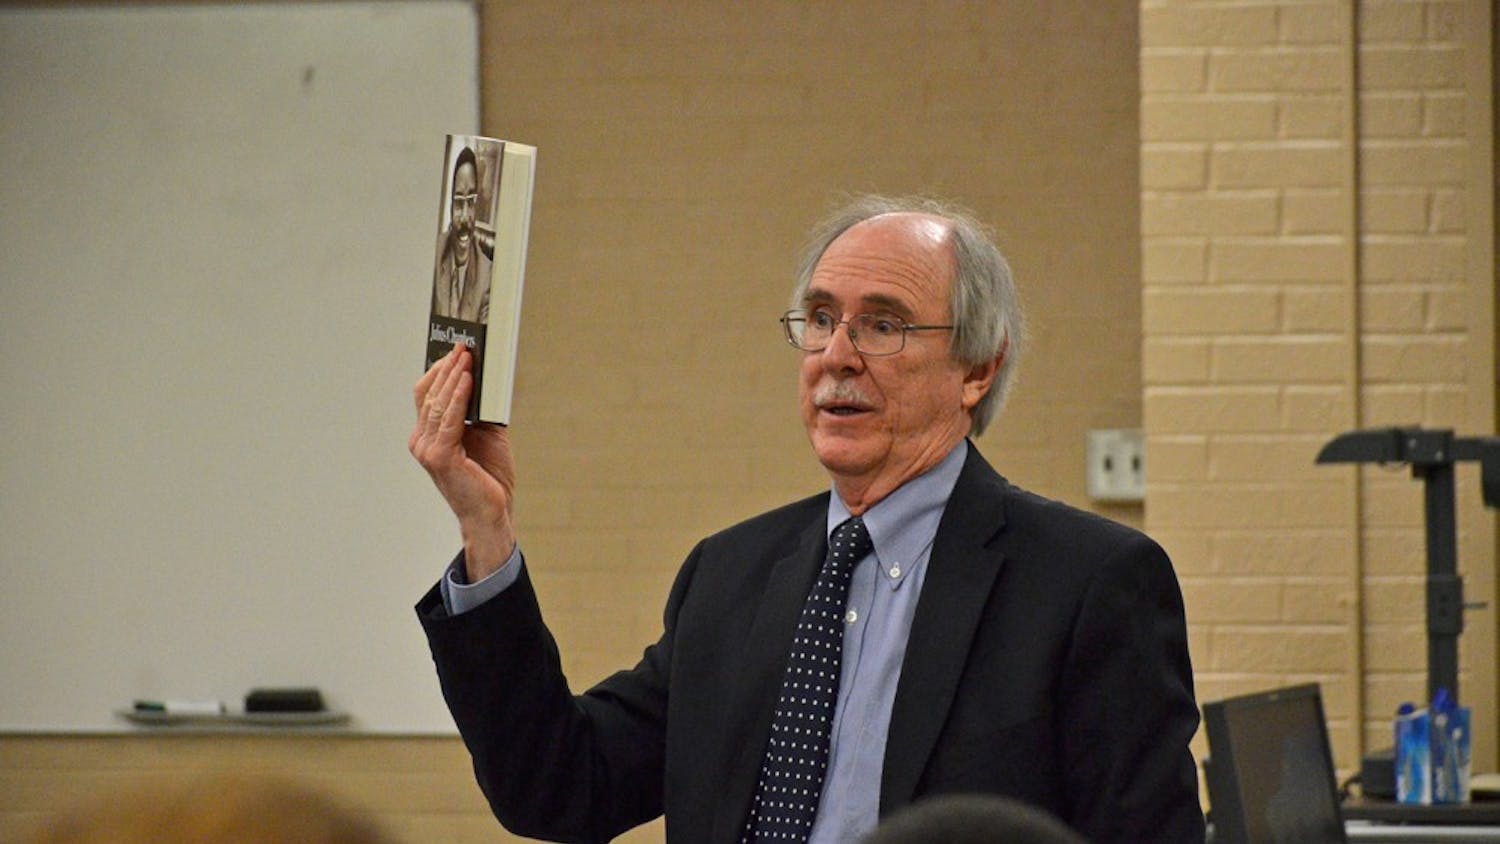 Previous UNC Law School dean John Charles Boger presents an analysis of Julius Chambers' book at a two part event on civil rights at the UNC Law School.